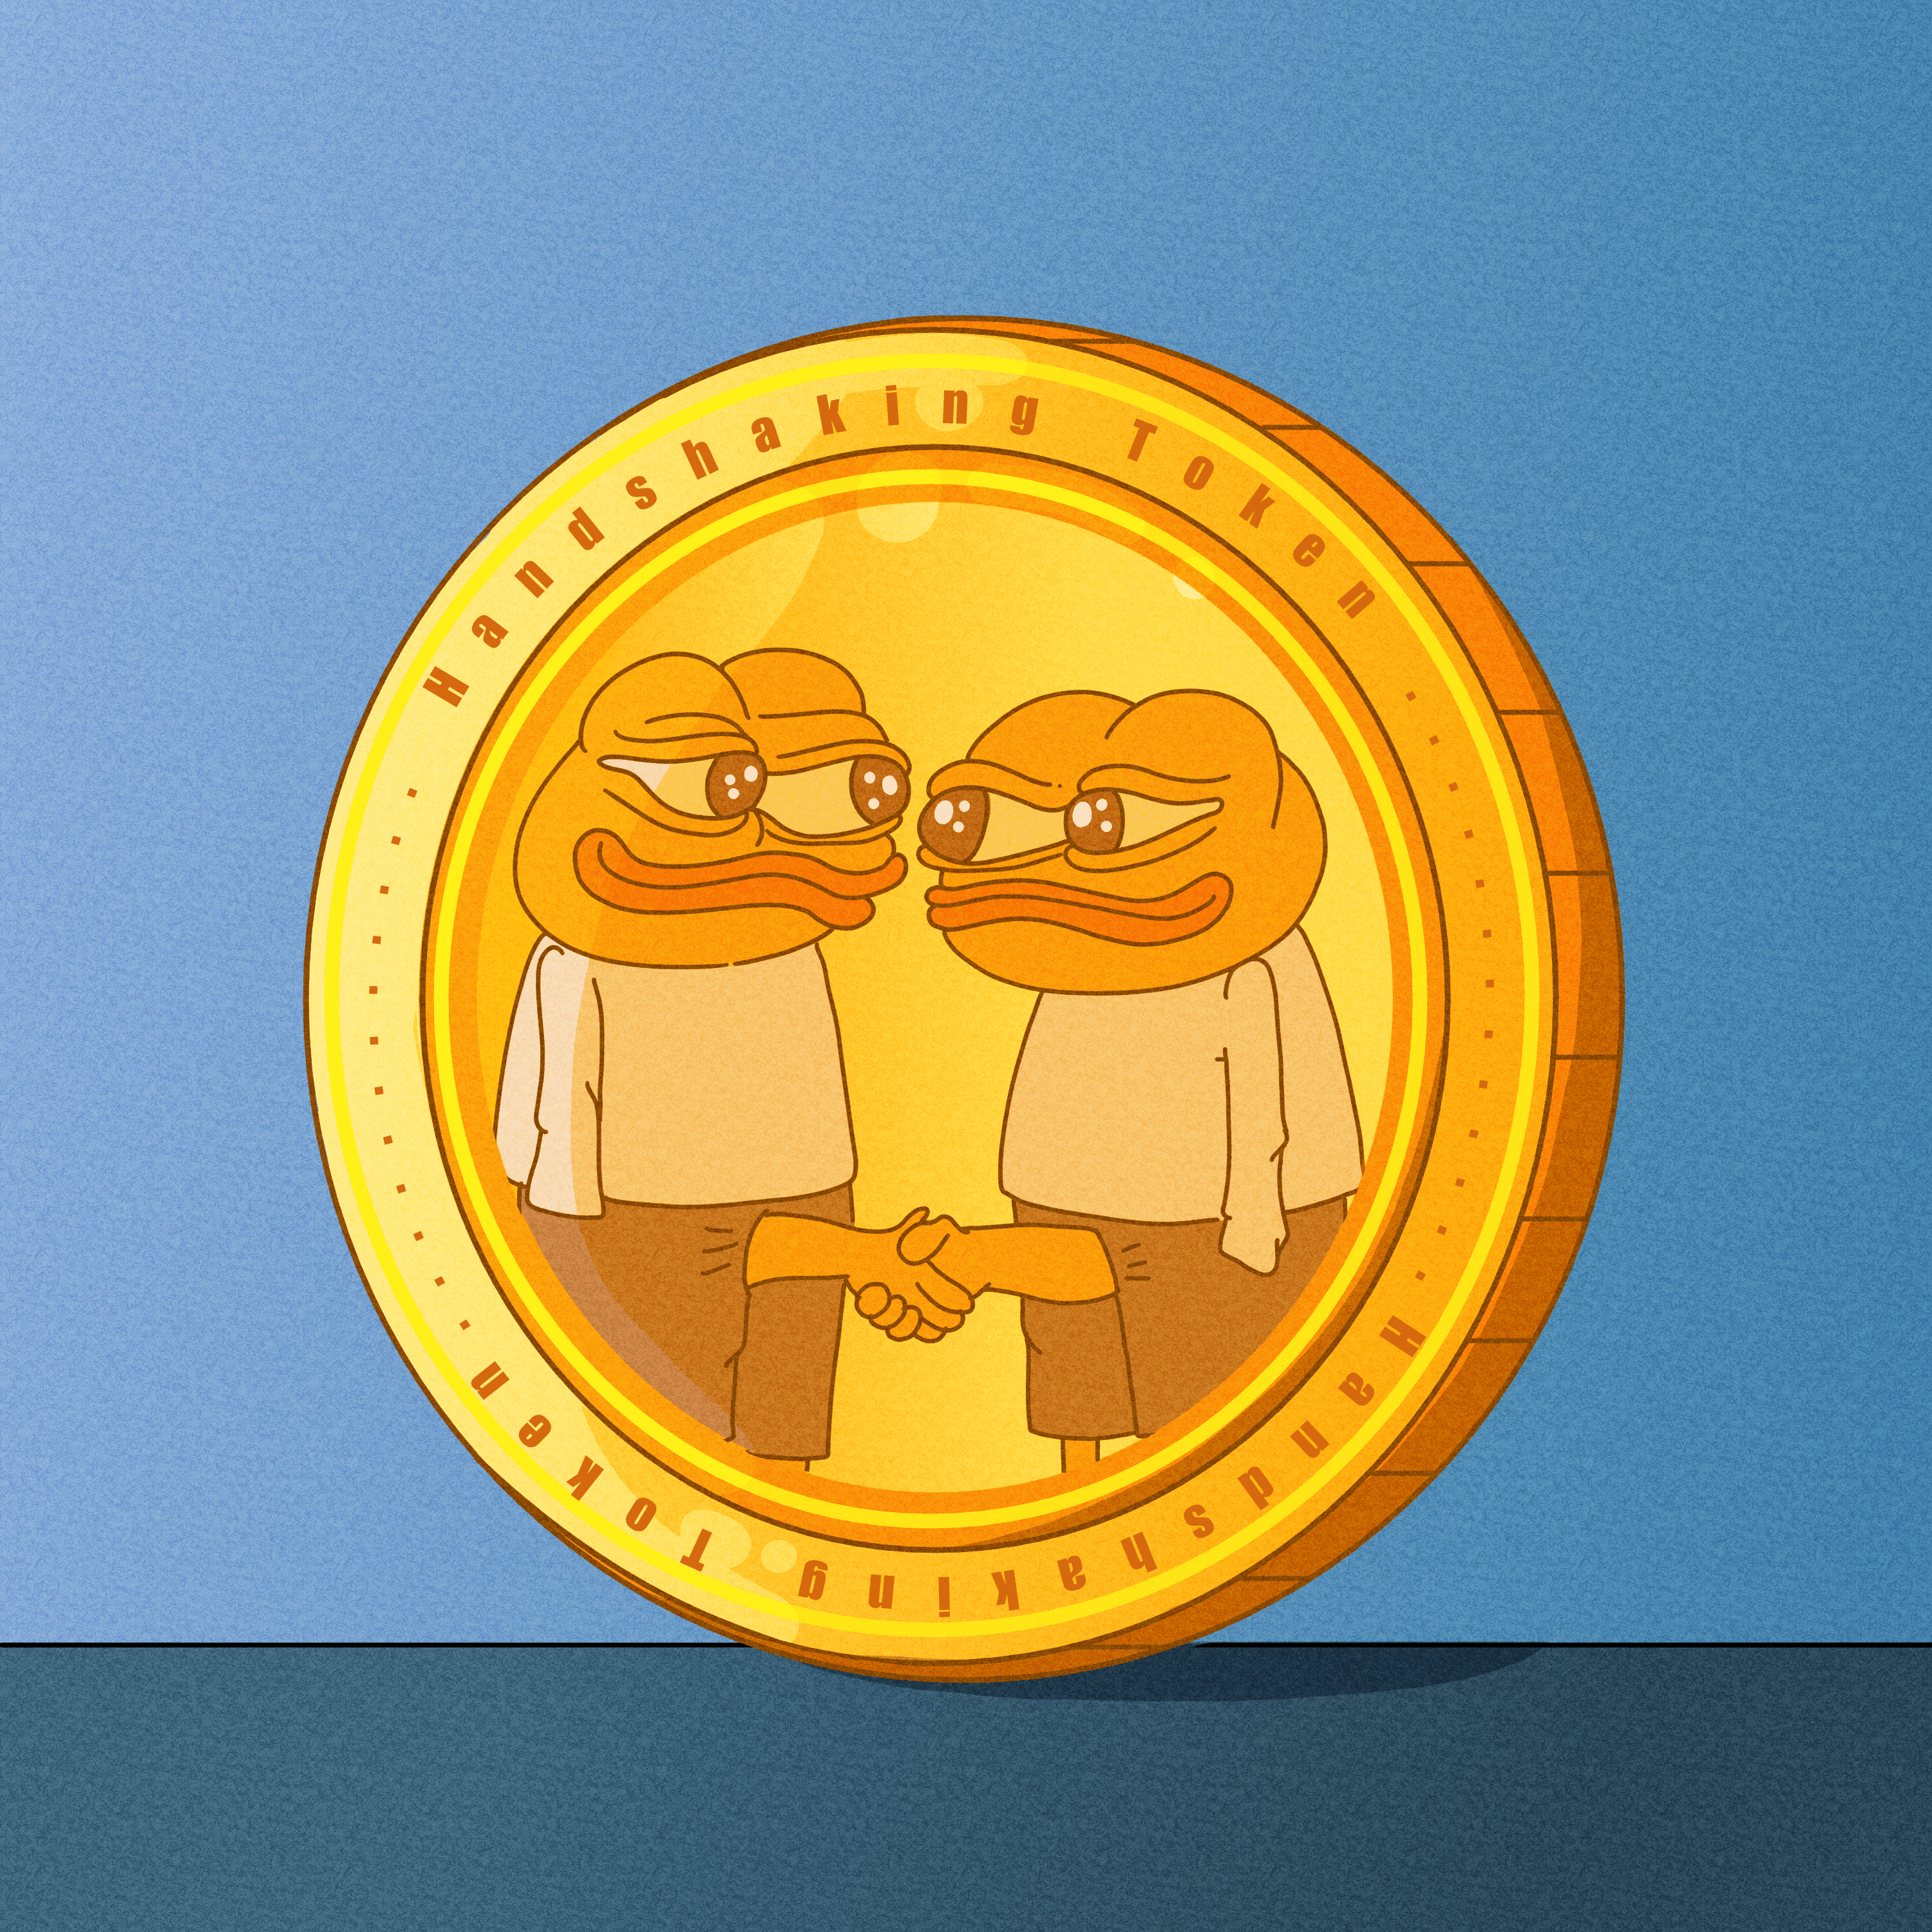 Honorary Coin